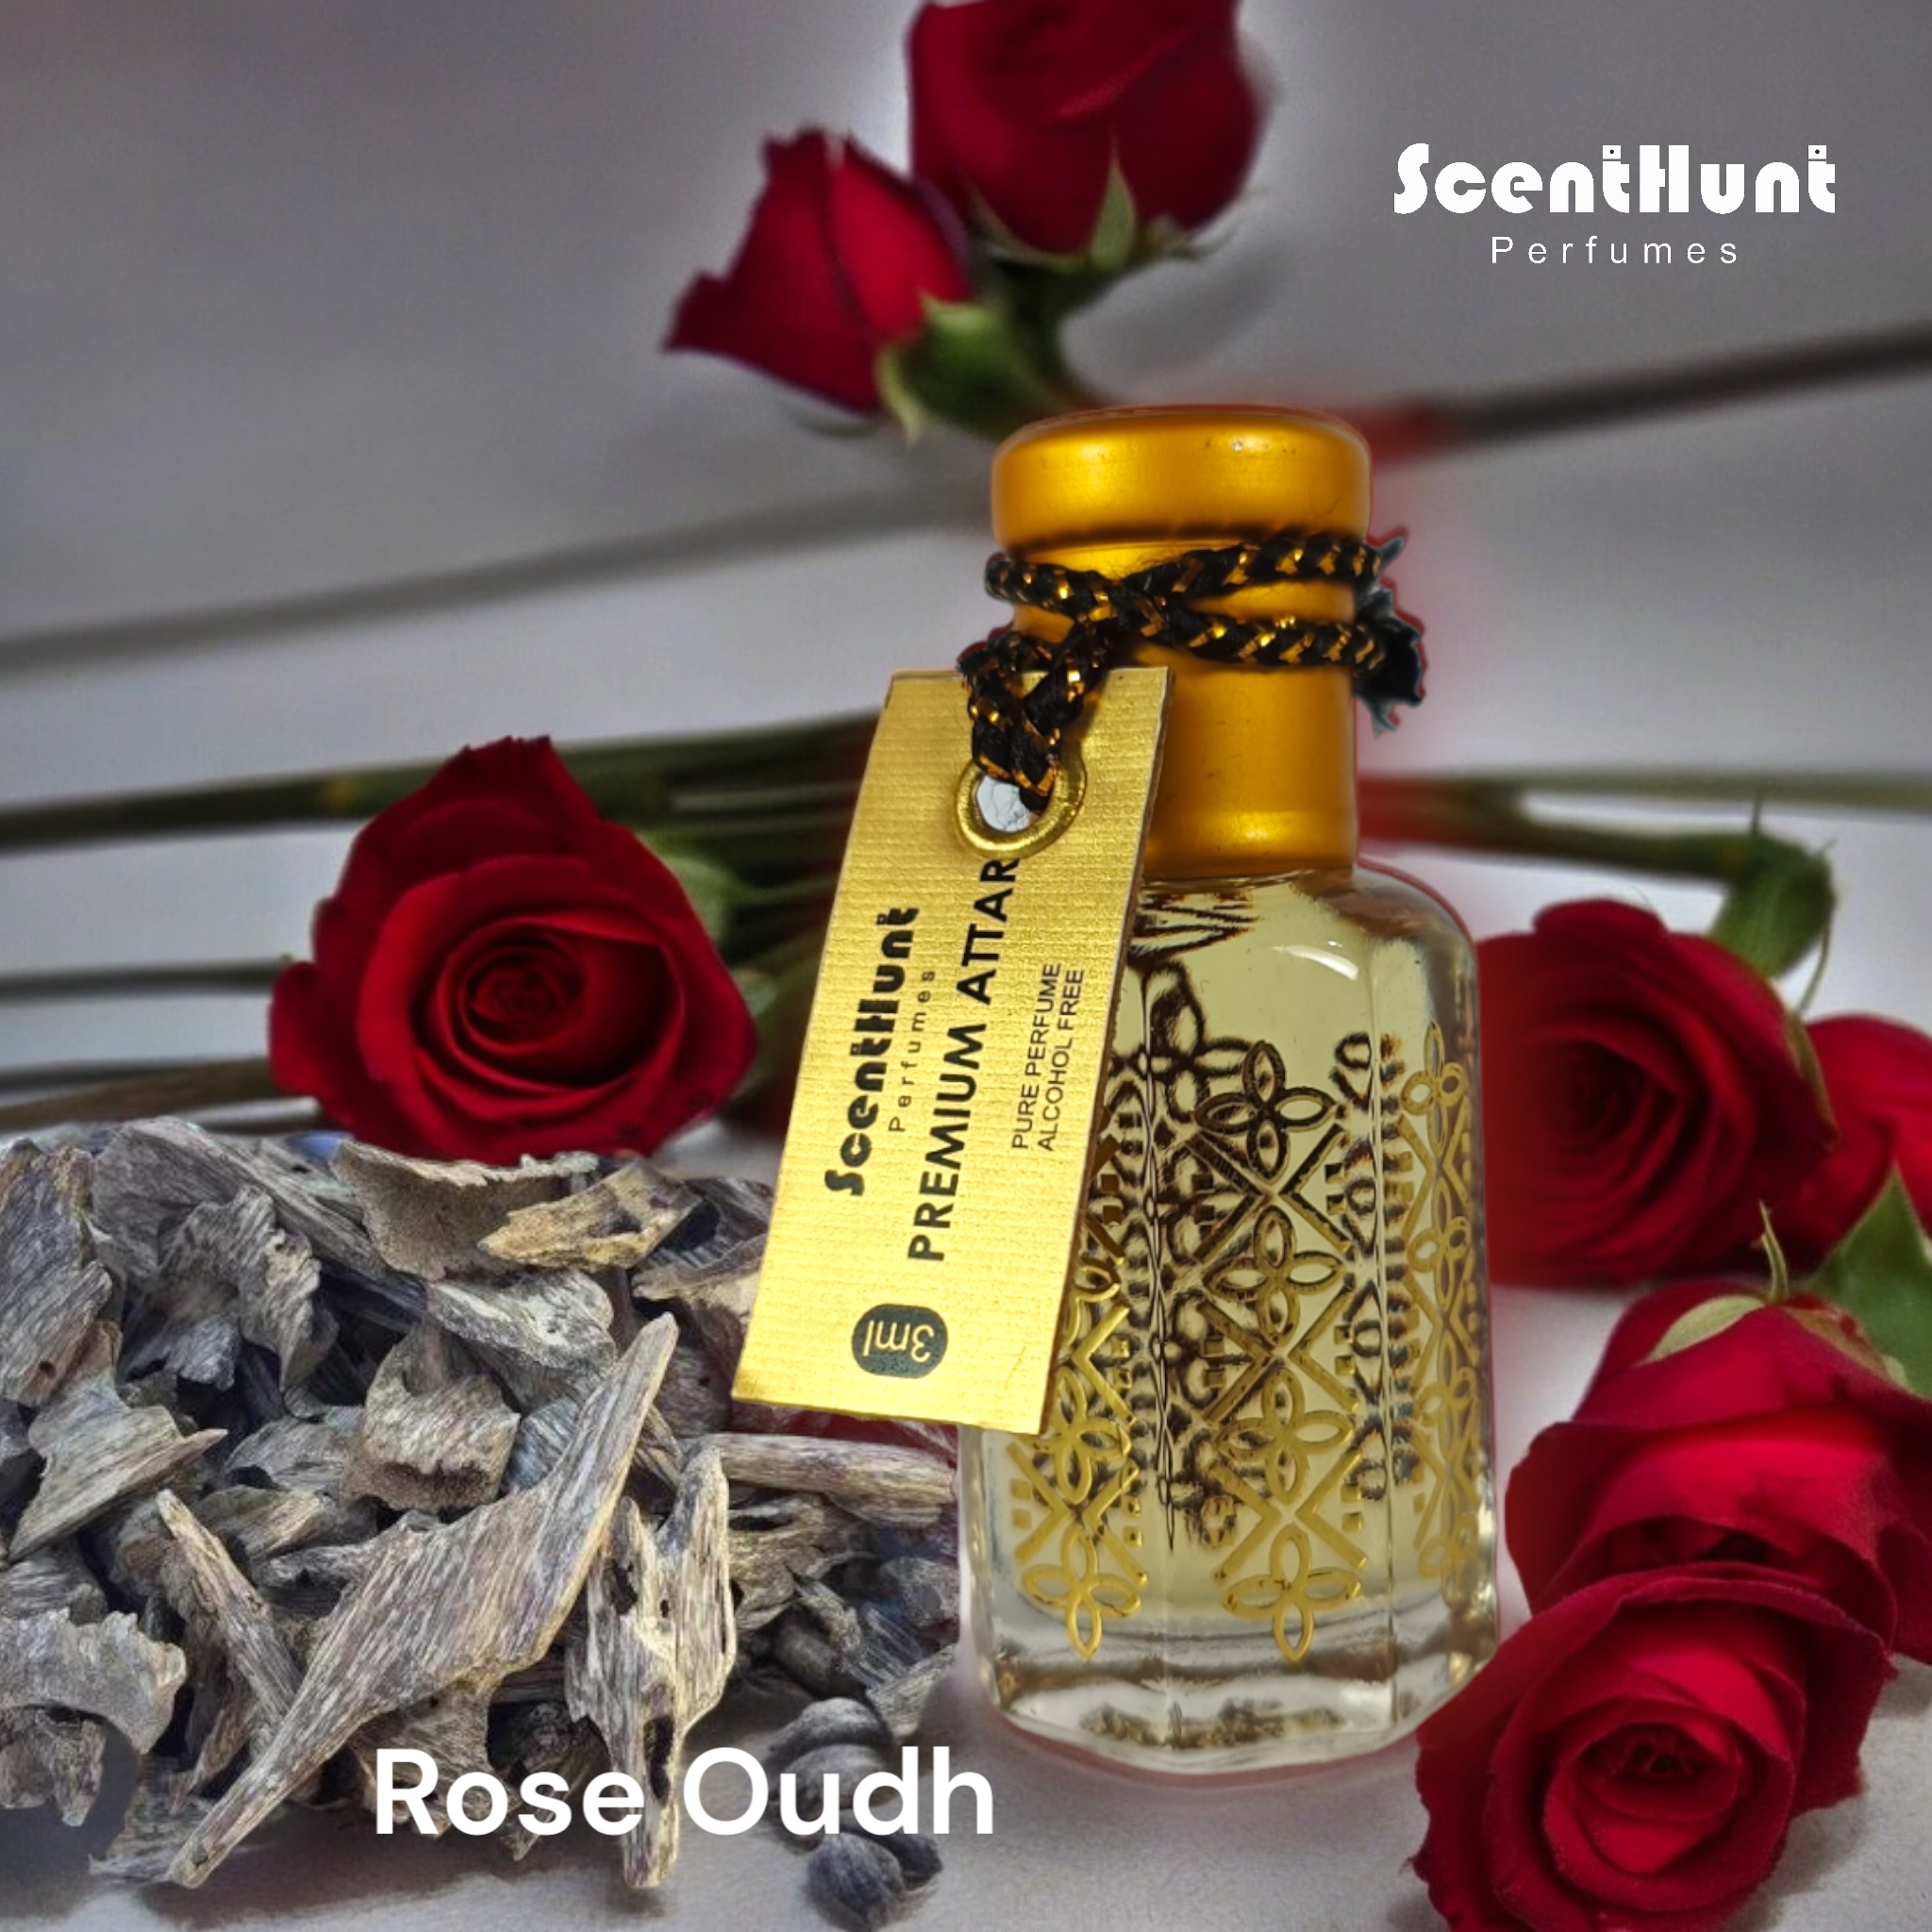 Scent Hunt Perfumes - Rose Oudh 12ml .